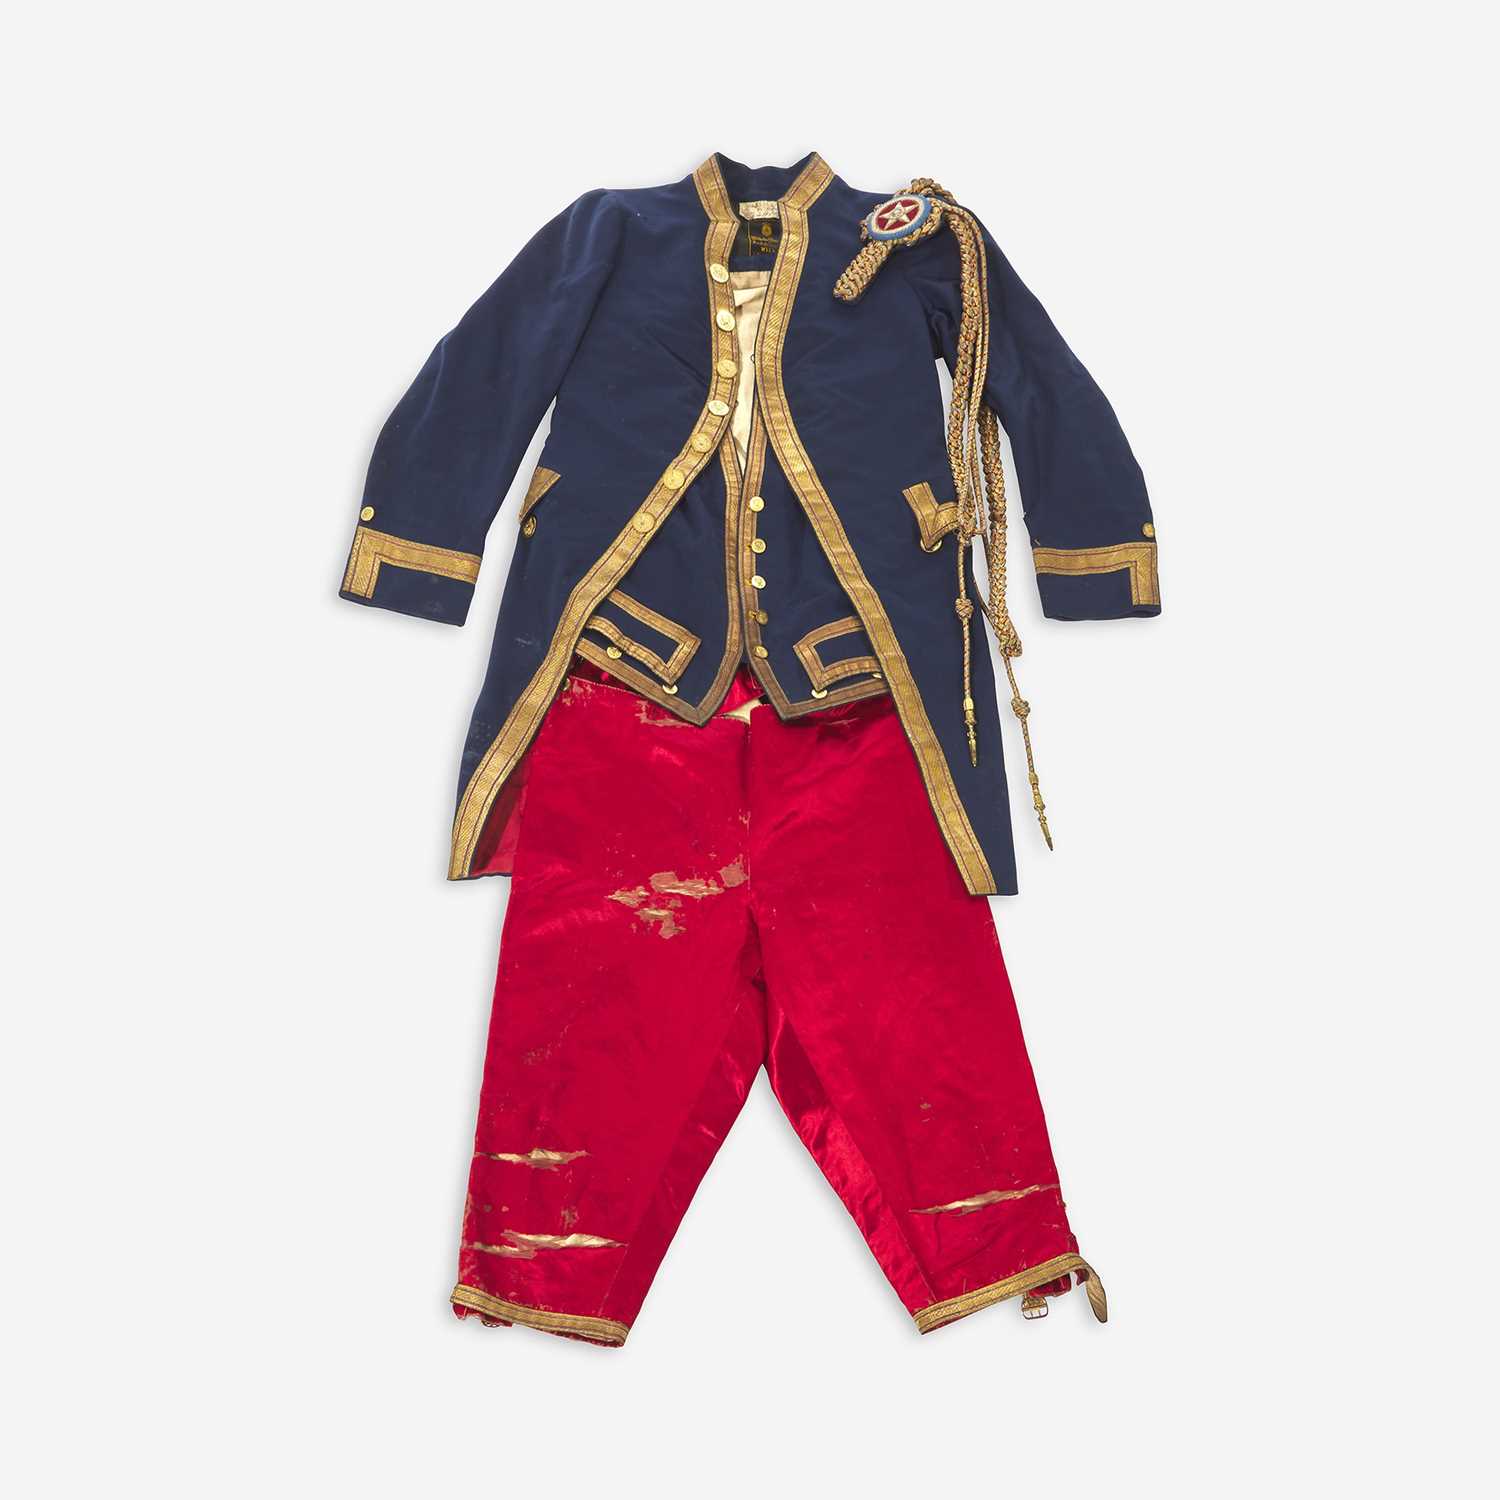 Lot 44 - A United States Diplomatic Uniform to the Austro-Hungarian Empire